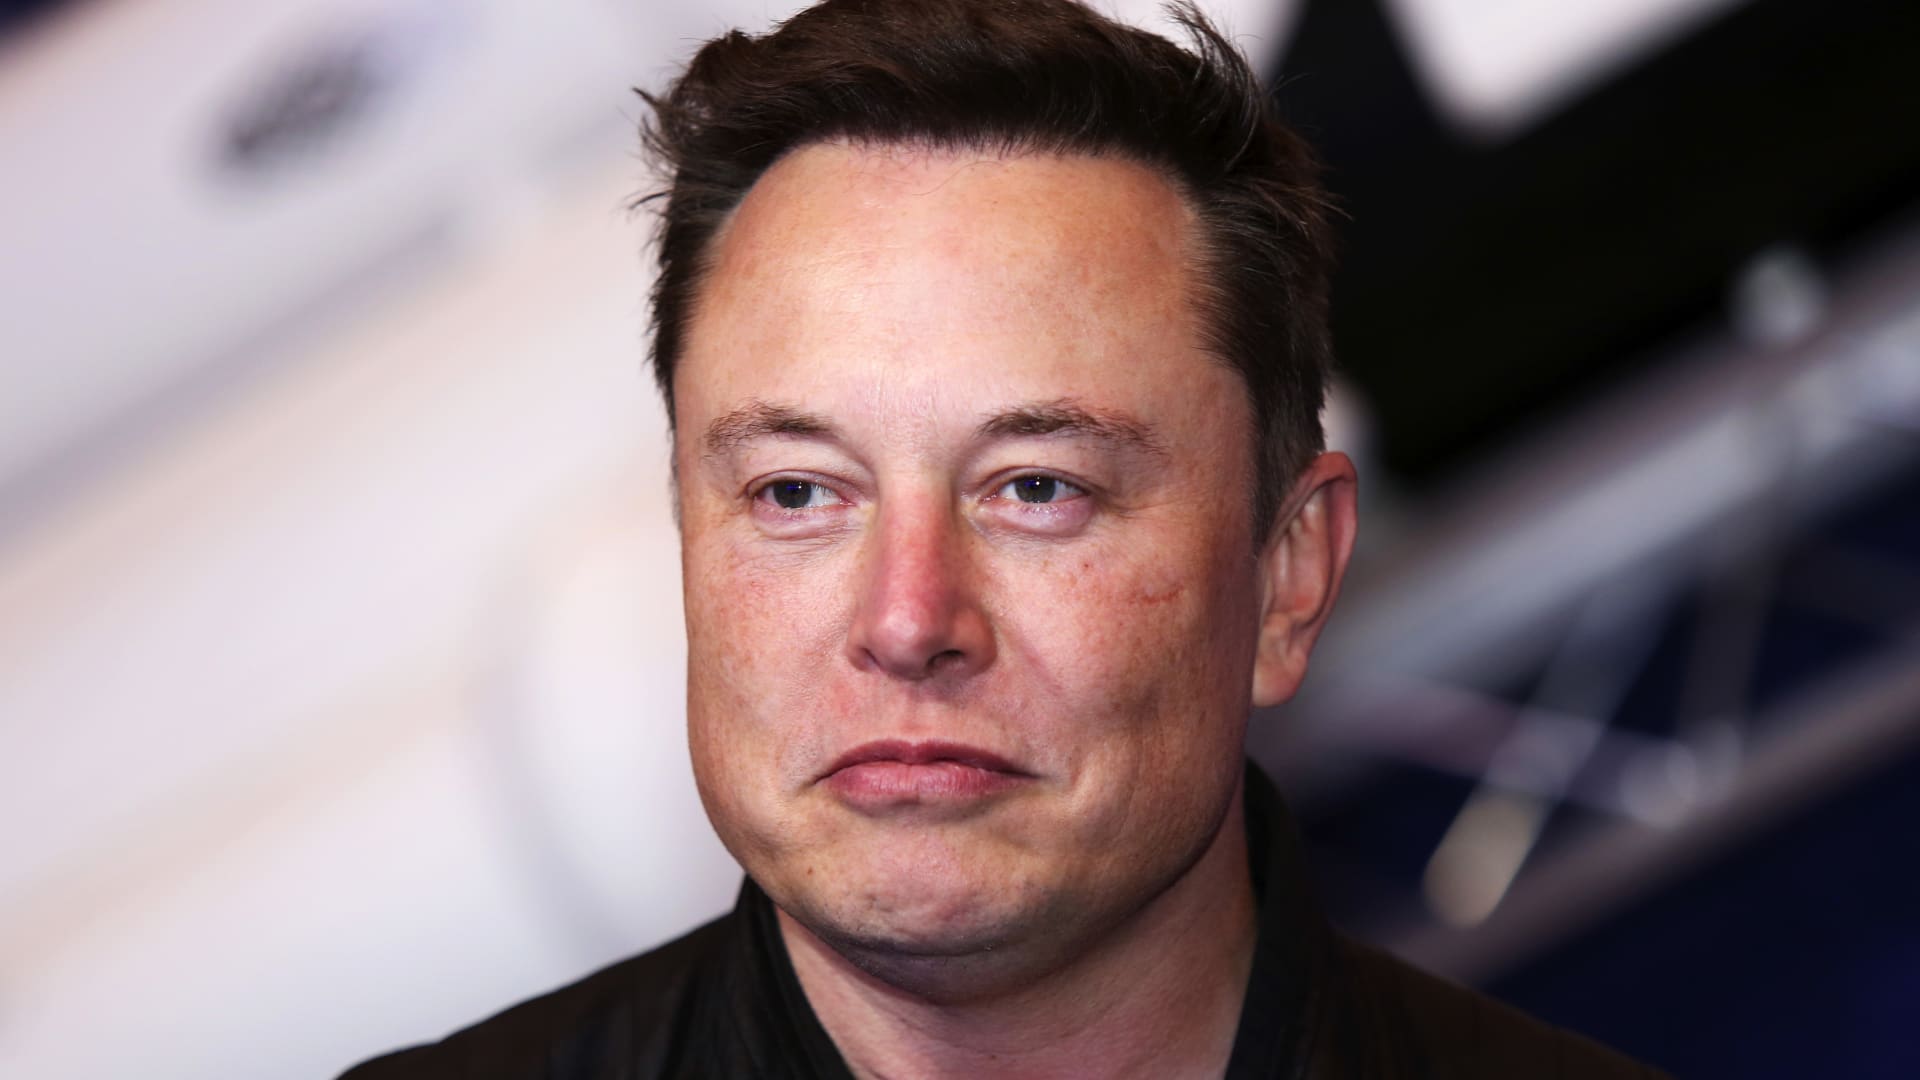 Elon Musk should apologize for mocking gender pronouns, says group that gave Tesla top LGBTQ-friendly rating